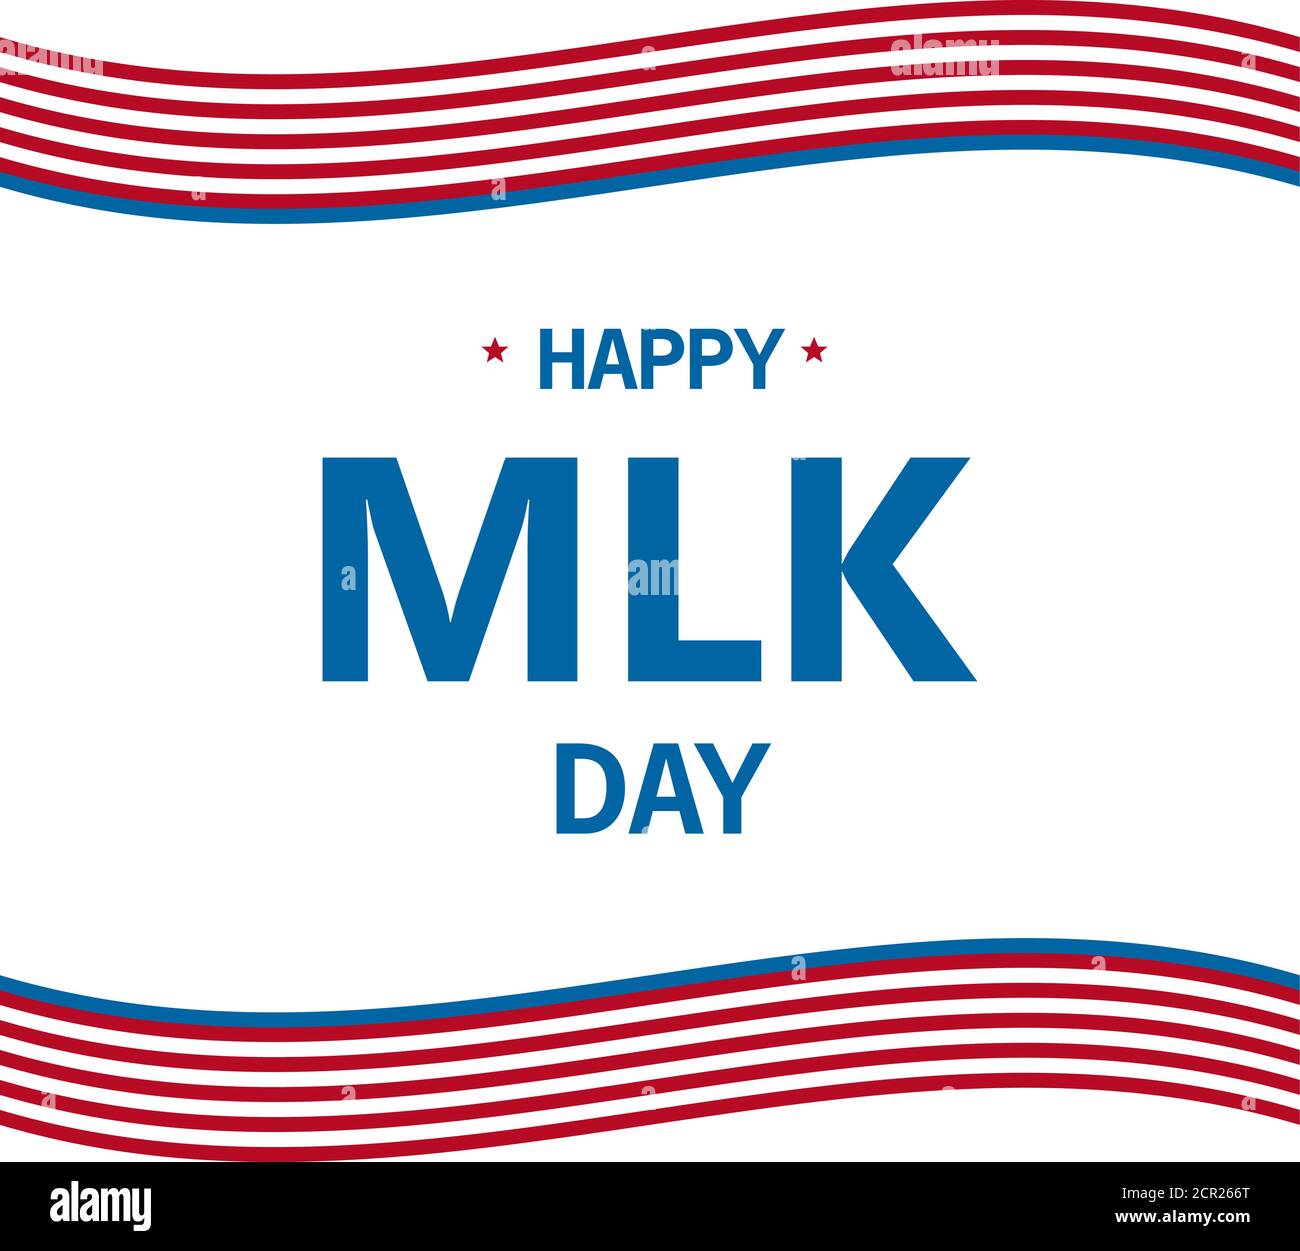 Martin Luther King Day typographic design.Festive congratulatory poster. Stock Vector